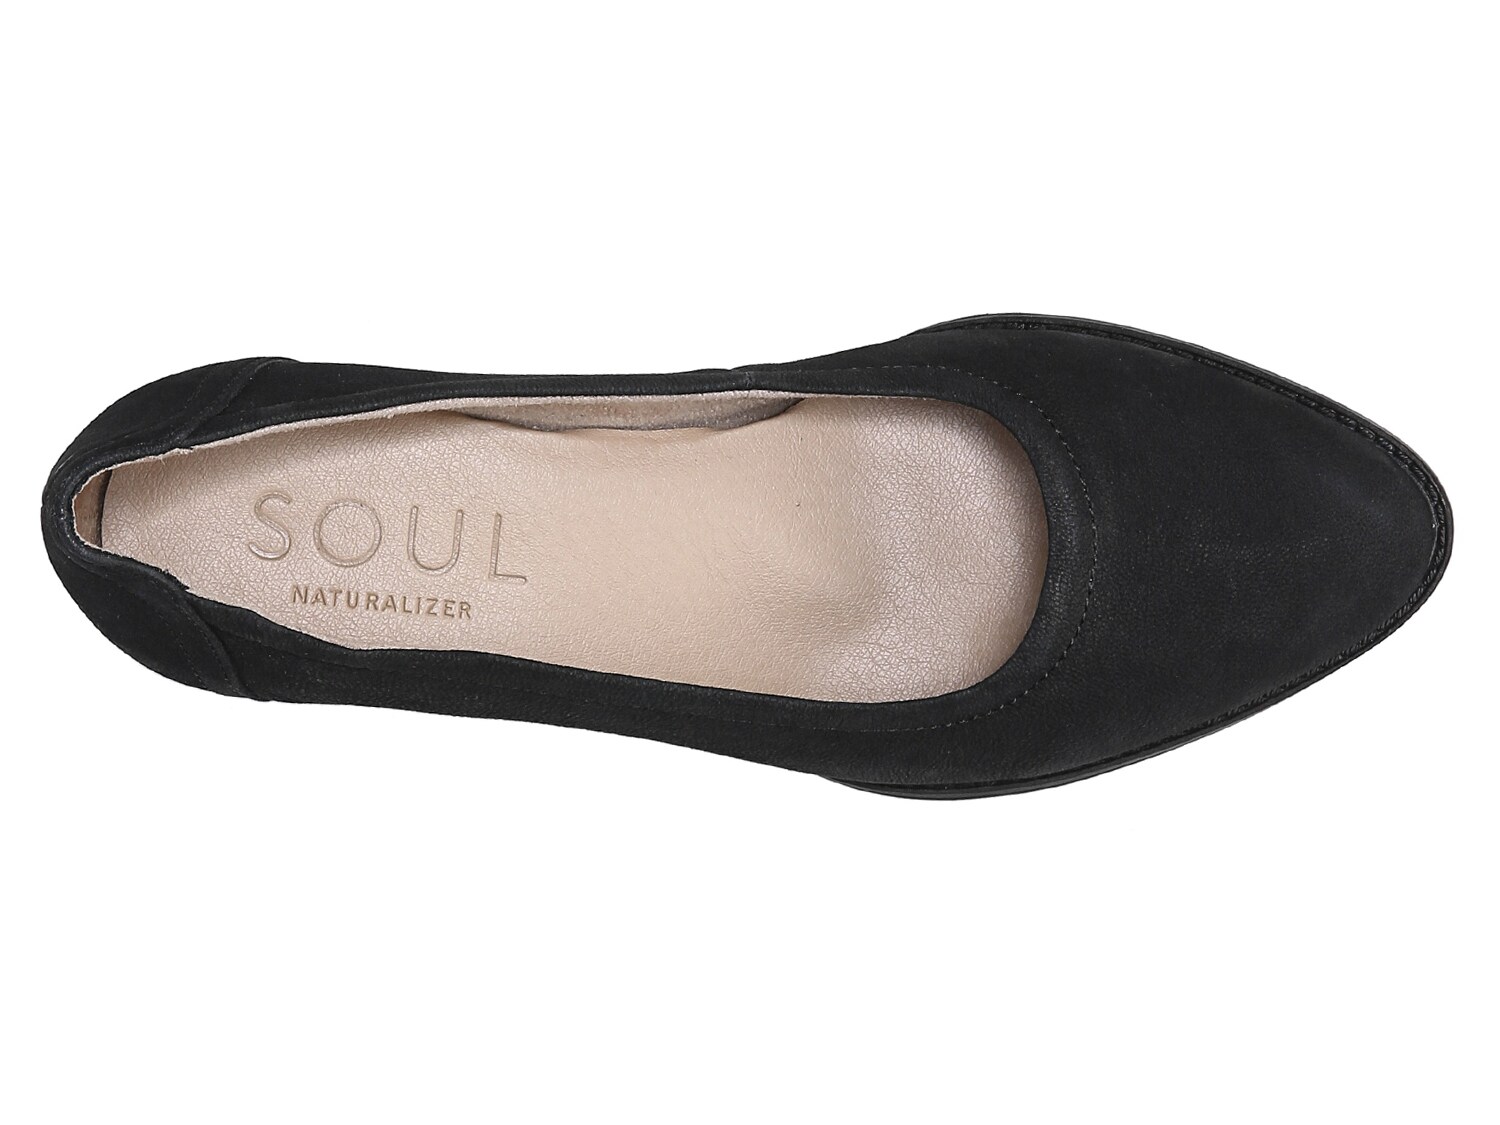 soul naturalizer sofie women's leather heels